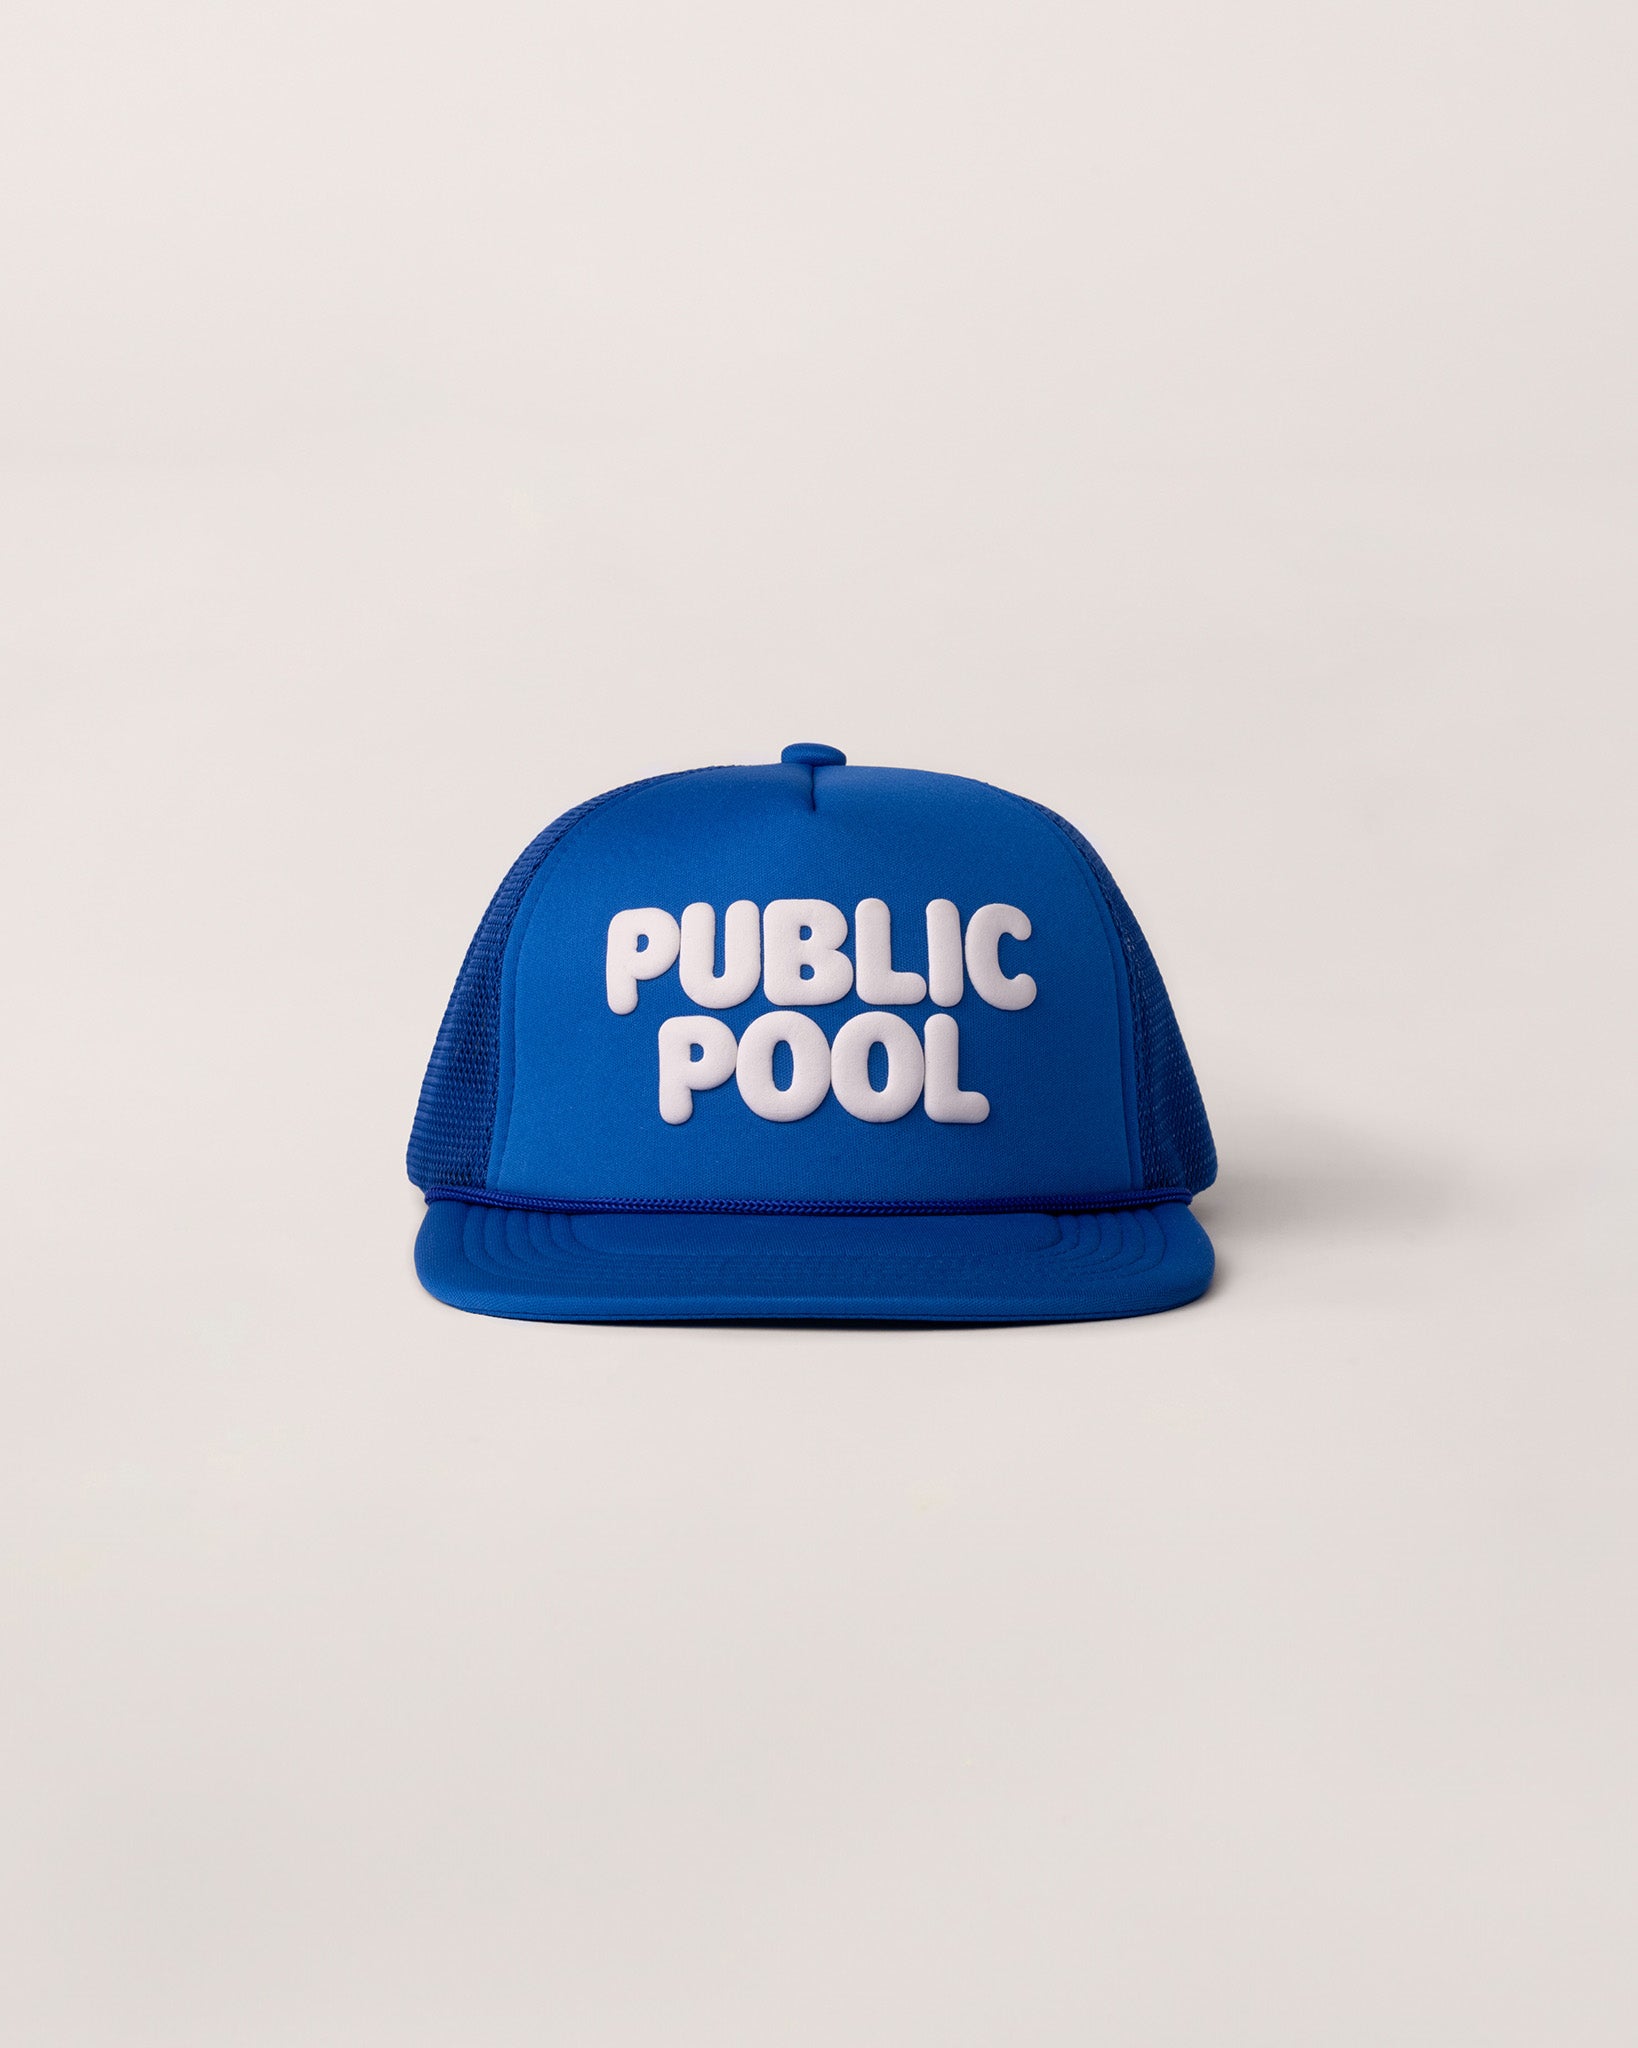 A blue trucker hat with a white Public Pool logo. 